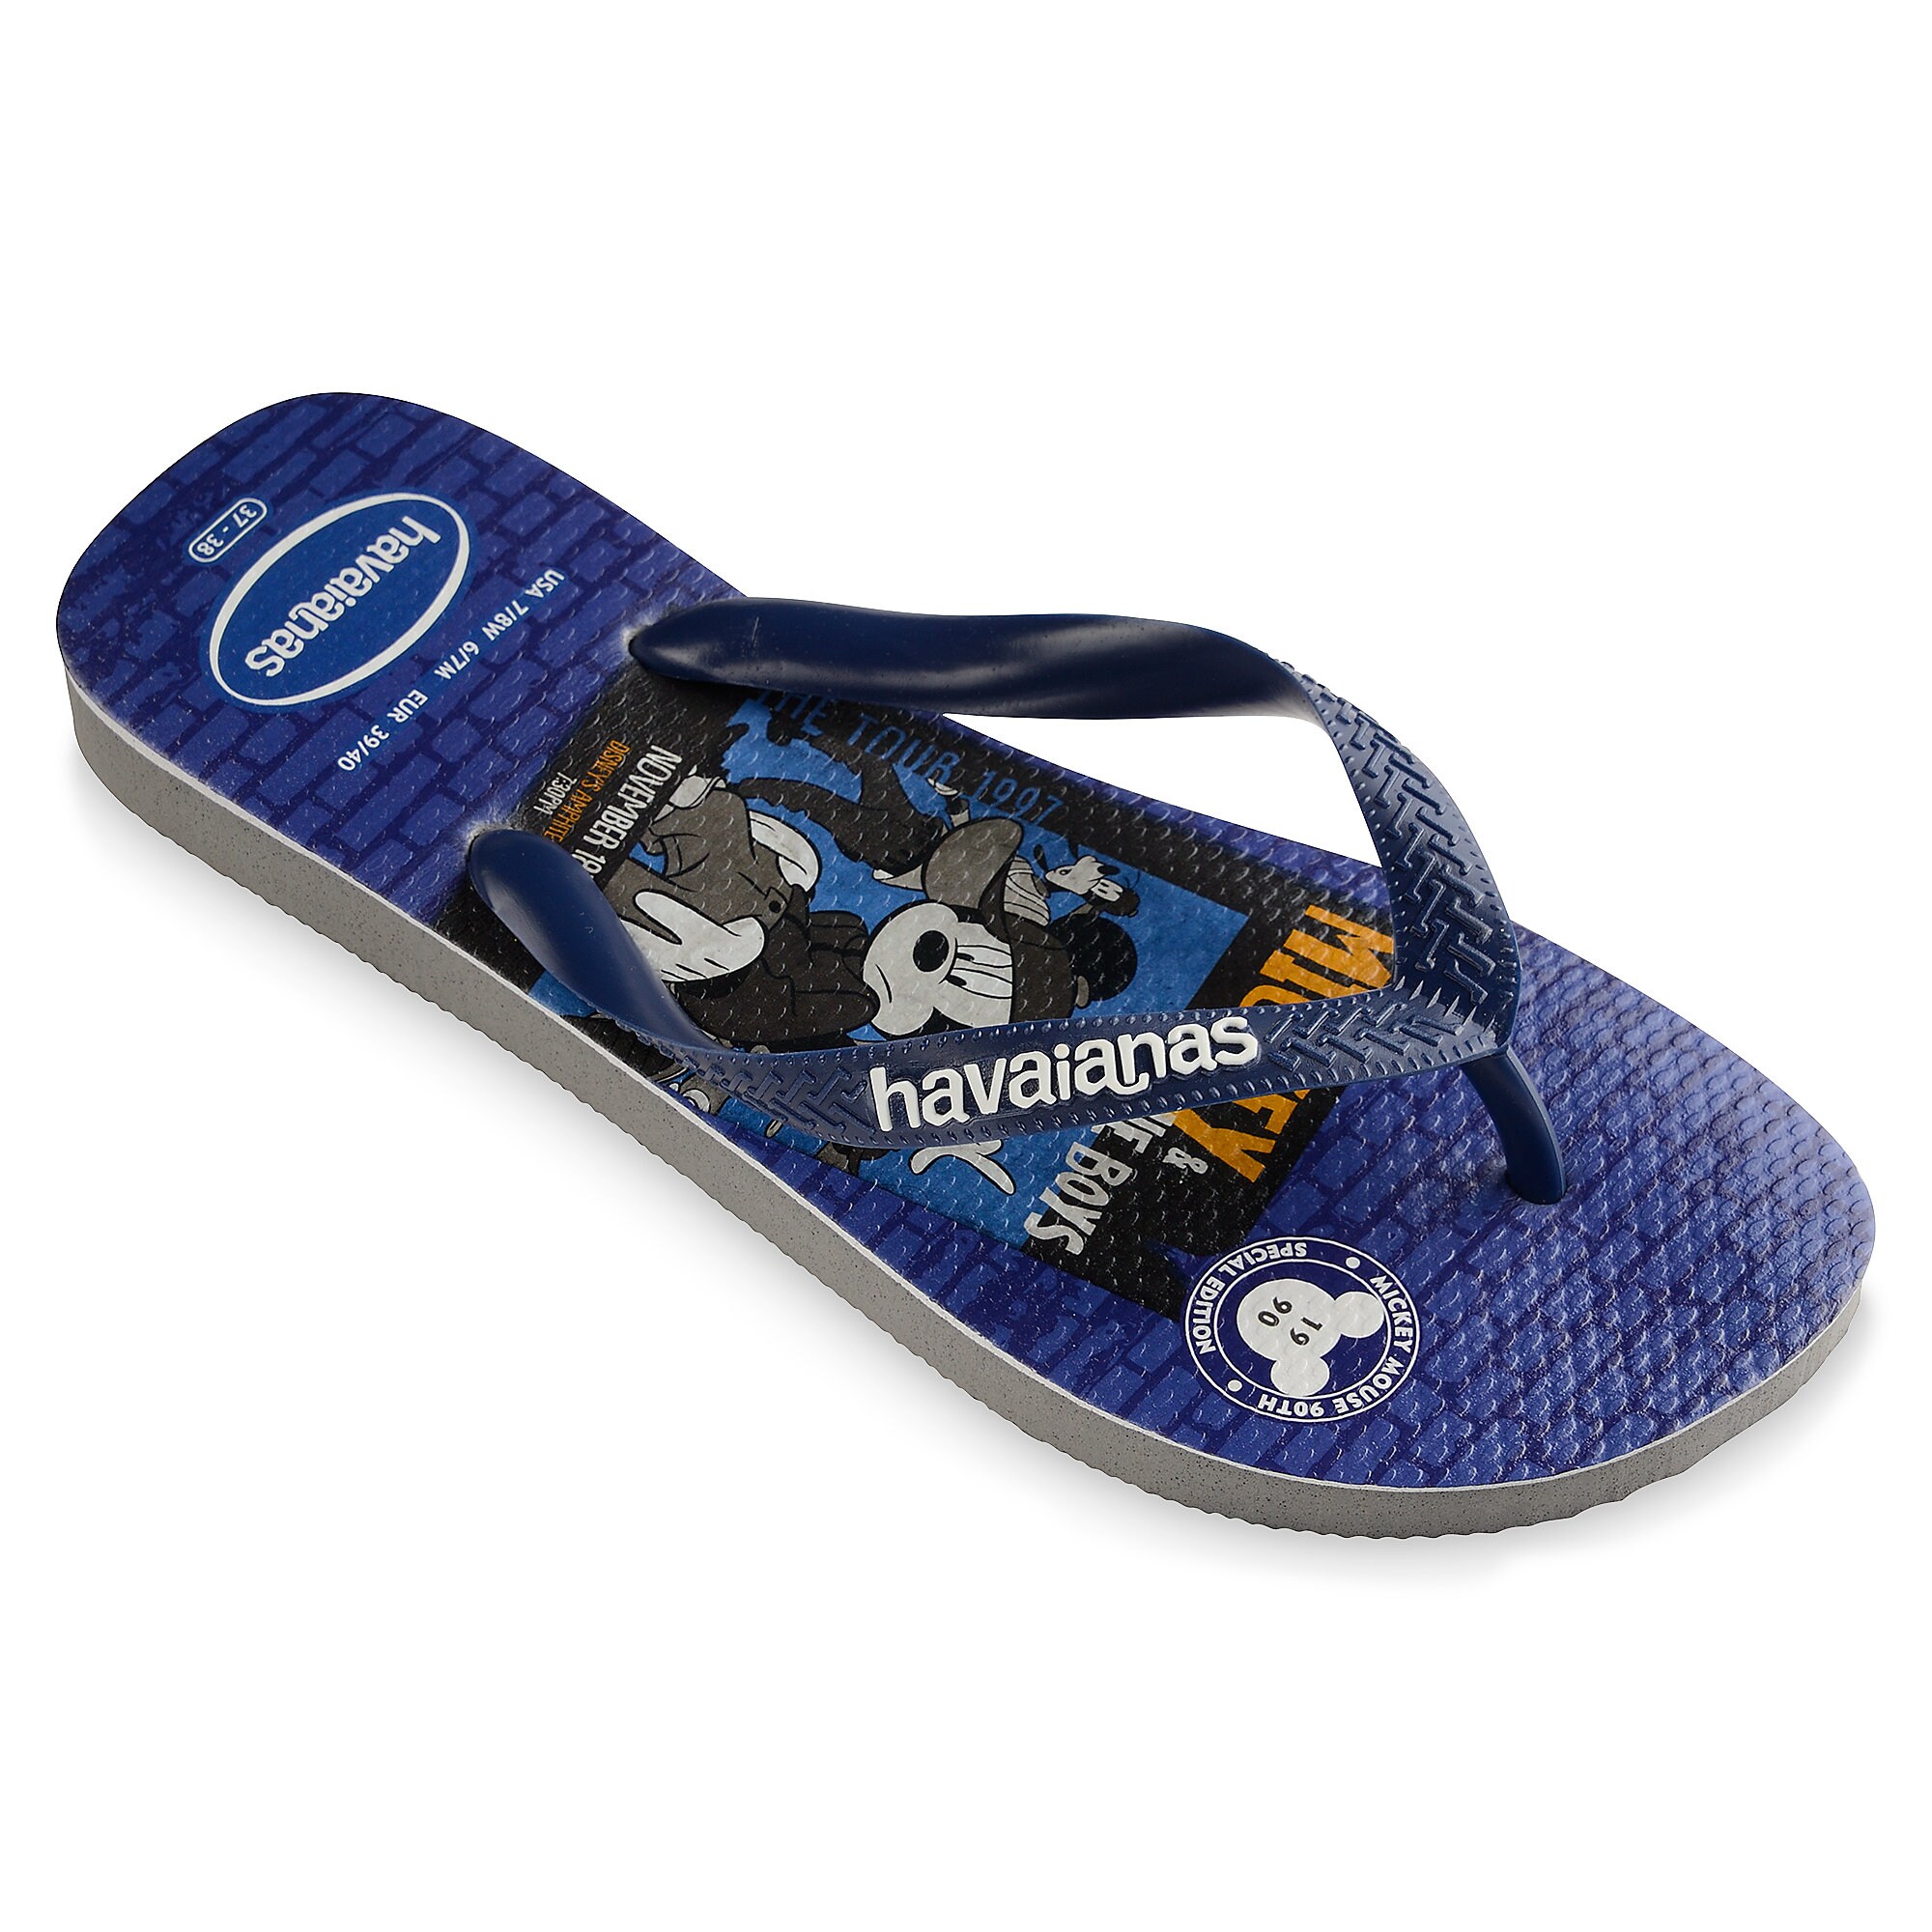 Mickey Mouse and Friends Boy Bands Flip Flops for Adults by Havaianas - 1990s